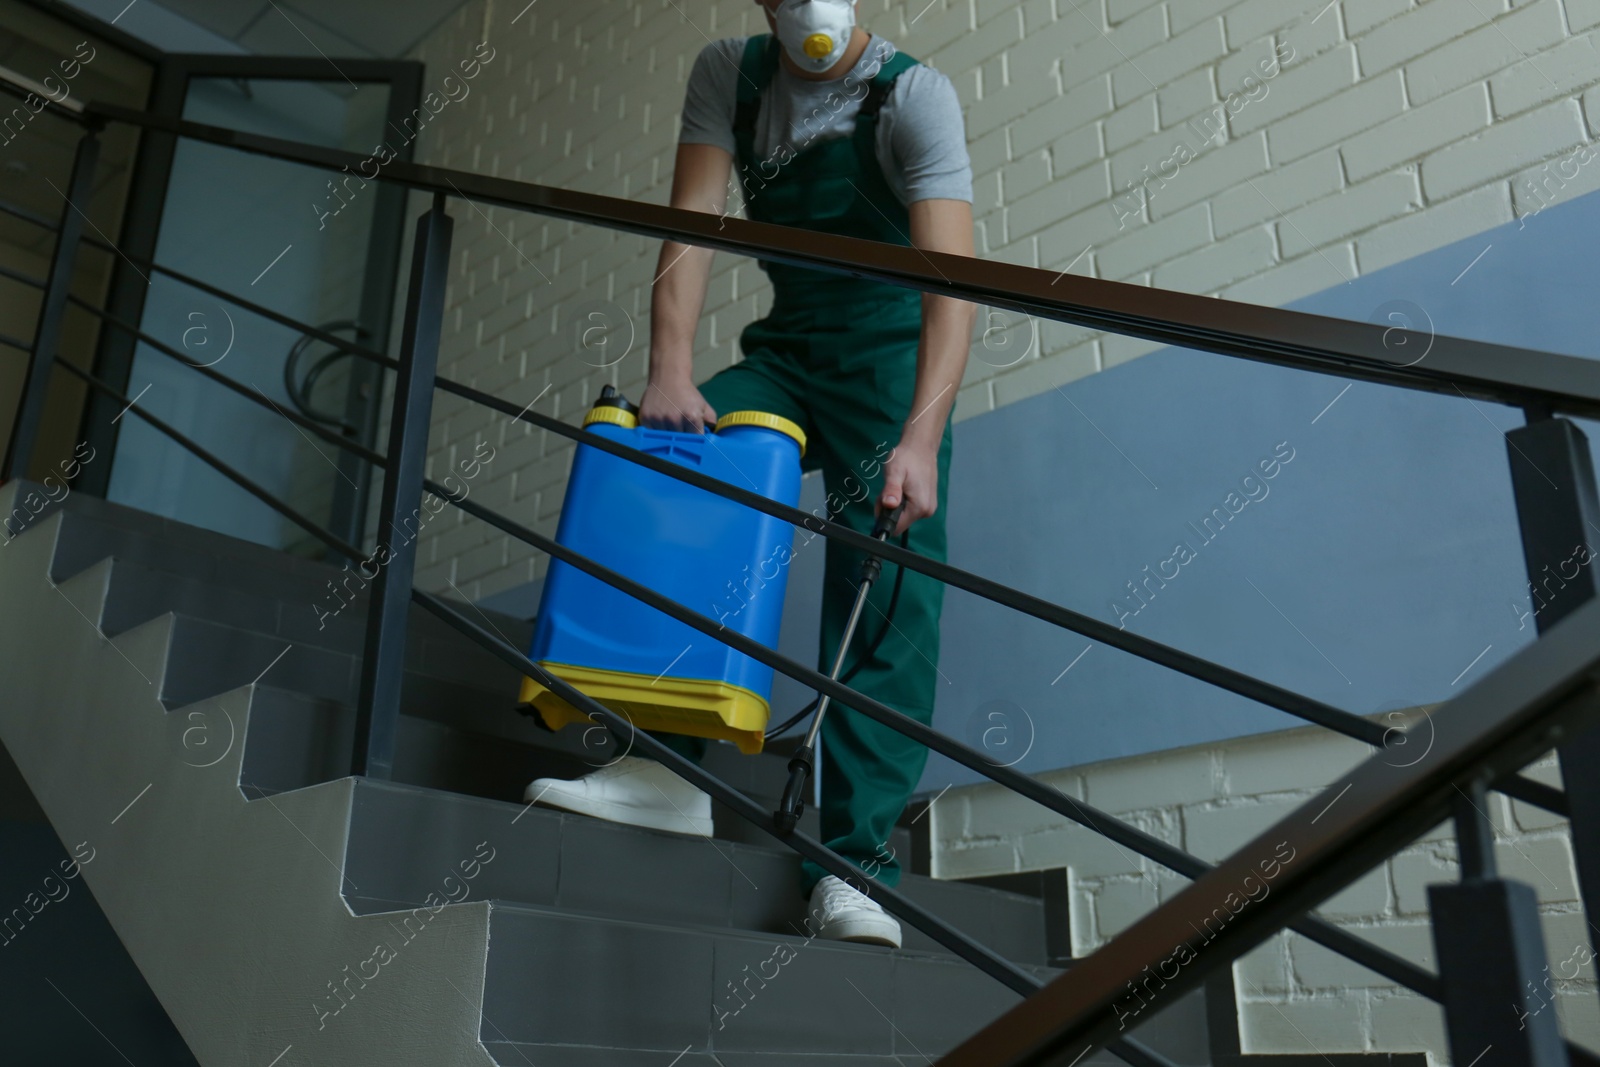 Photo of Pest control worker spraying pesticide on stairs indoors, closeup